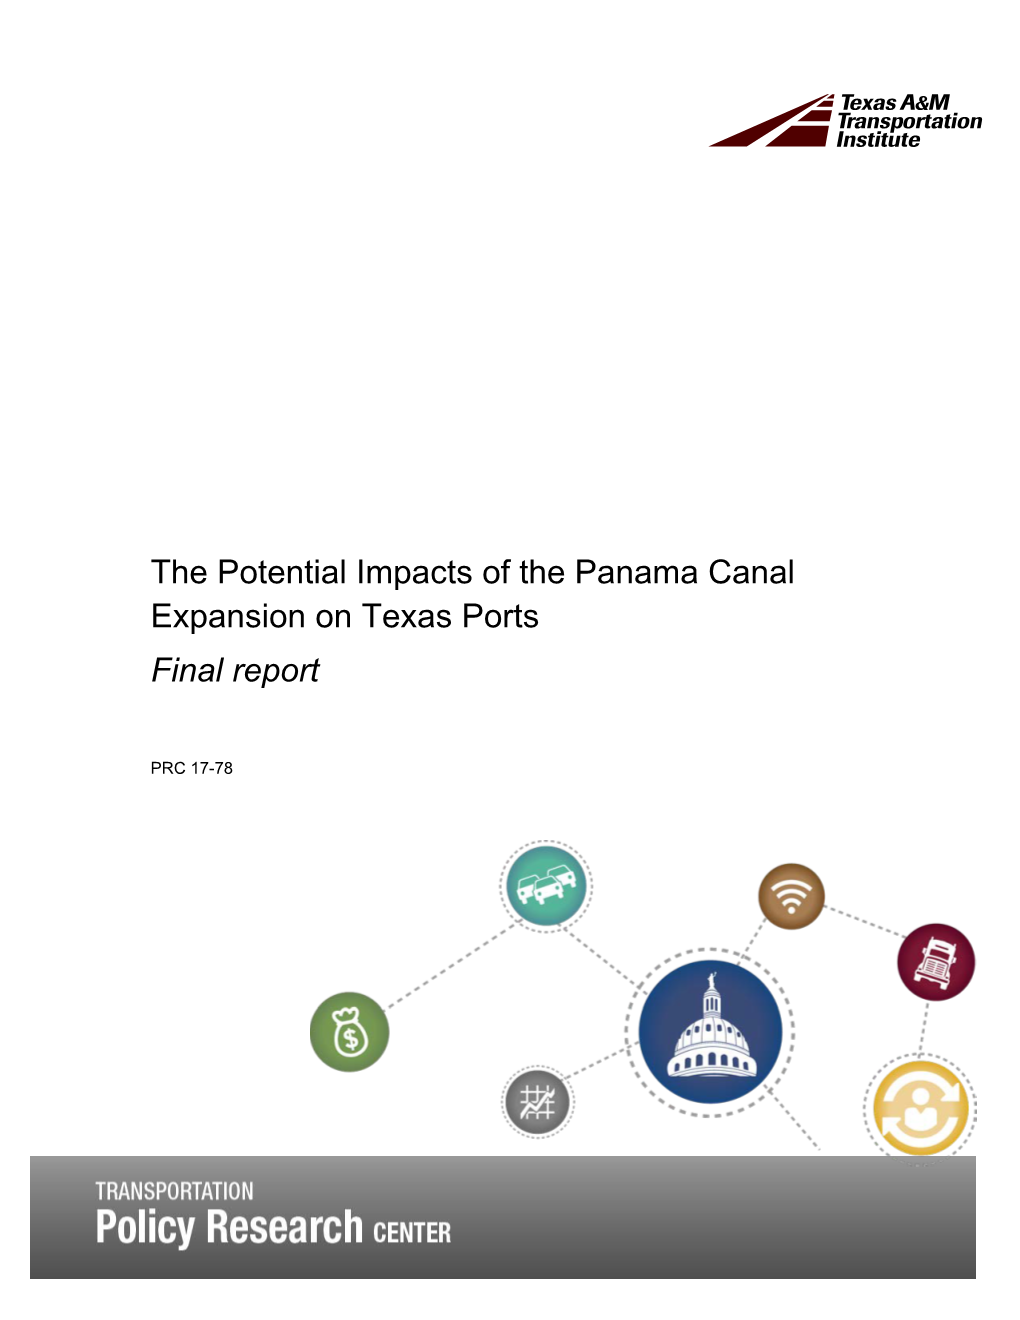 The Potential Impacts of the Panama Canal Expansion on Texas Ports Final Report